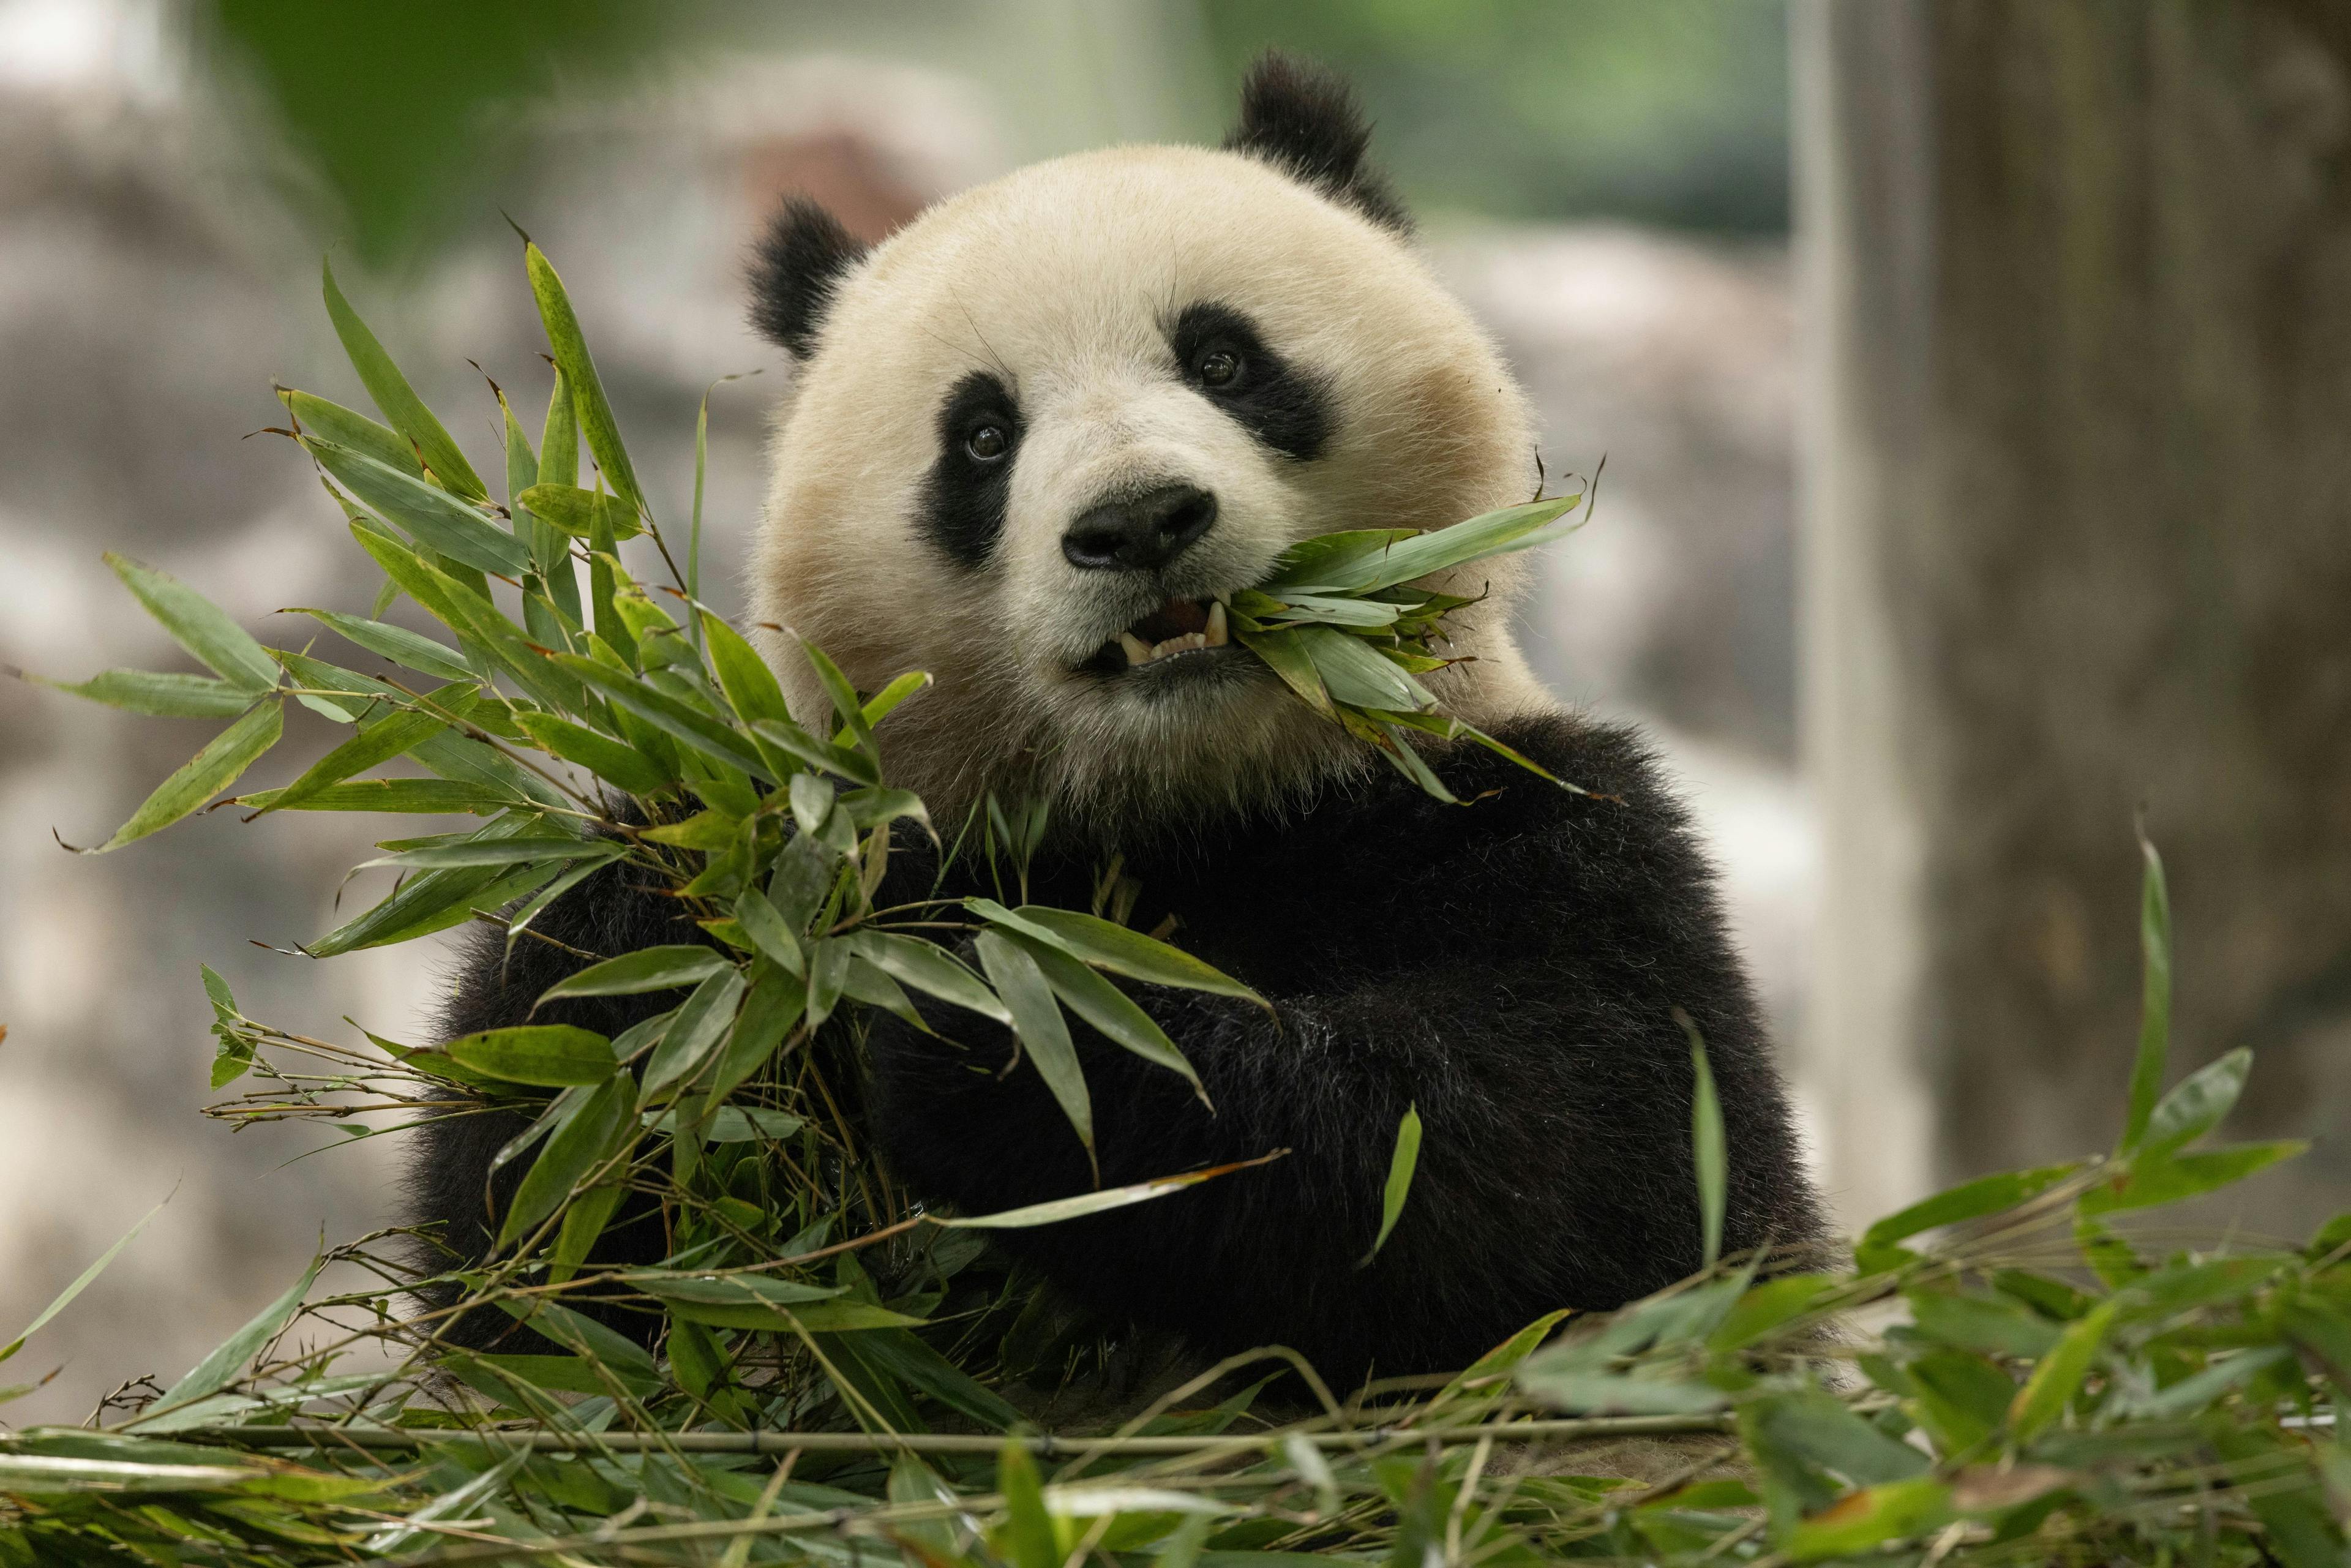 Qing Bao in her habitat at Dujiangyan Base in Sichuan, China. (Photo credit: Roshan Patel, Smithsonian’s National Zoo and Conservation Biology Institute)